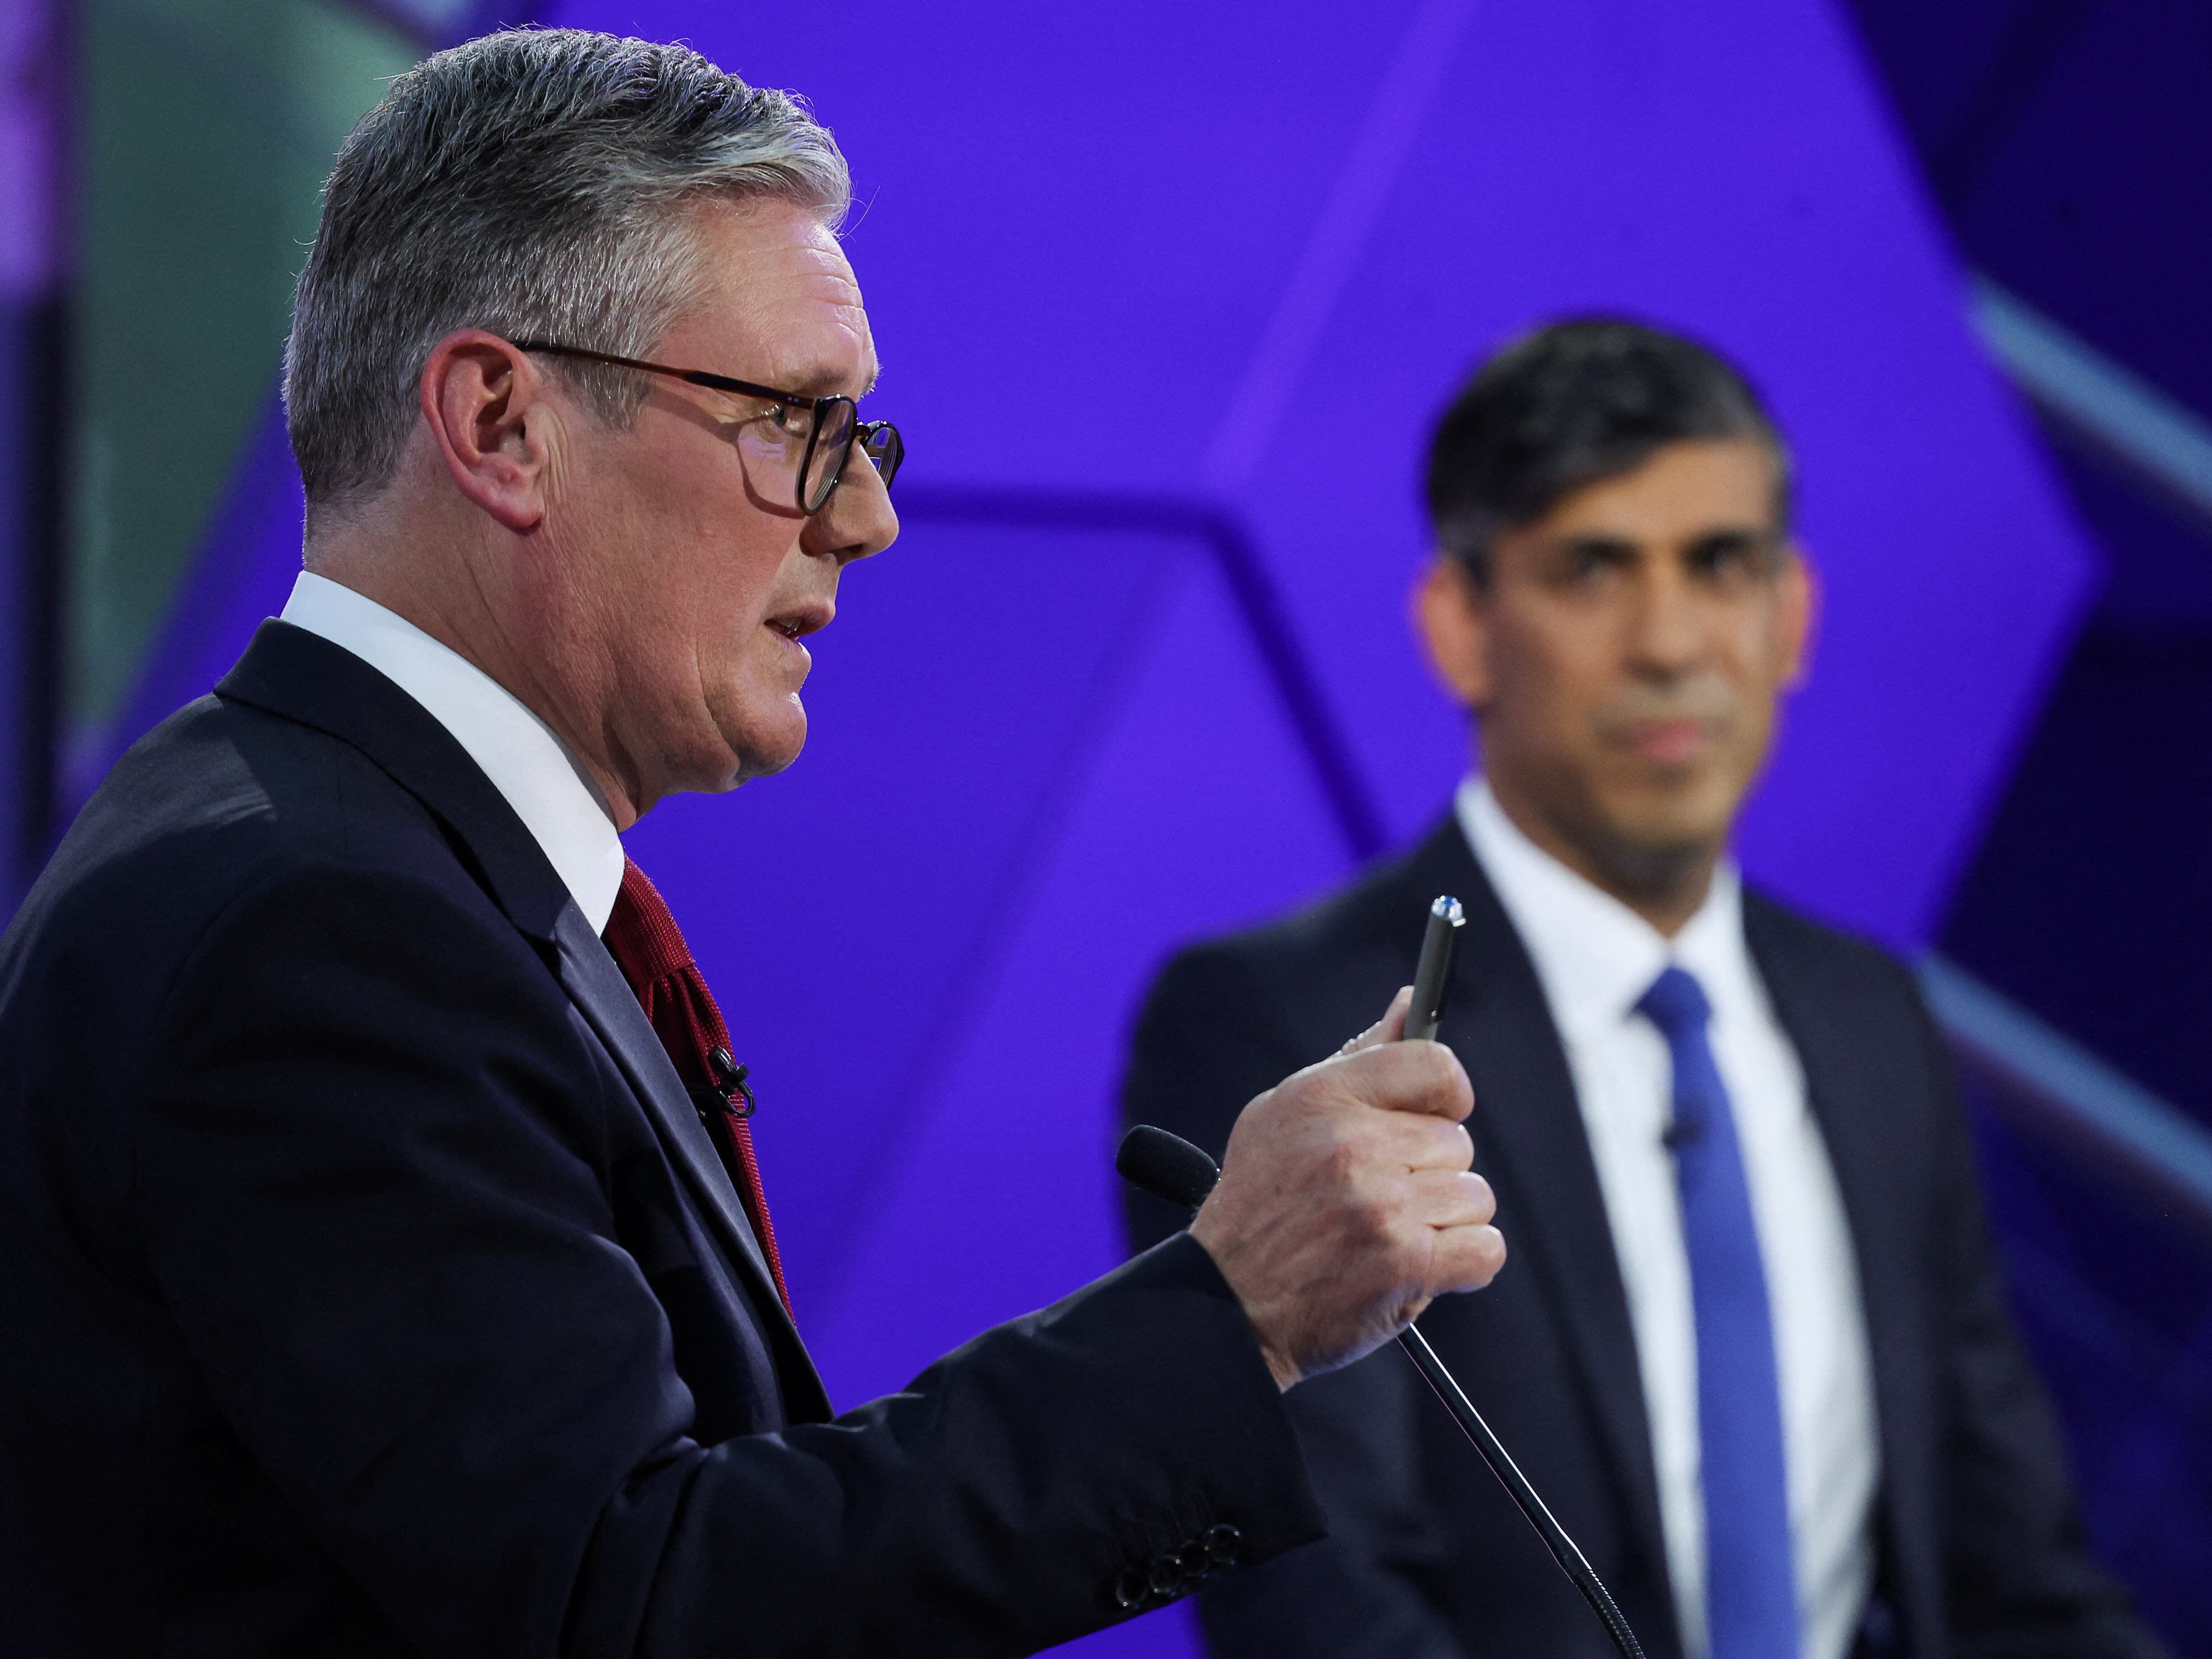 Sunak and Starmer clash over deepening betting row in heated final TV debate